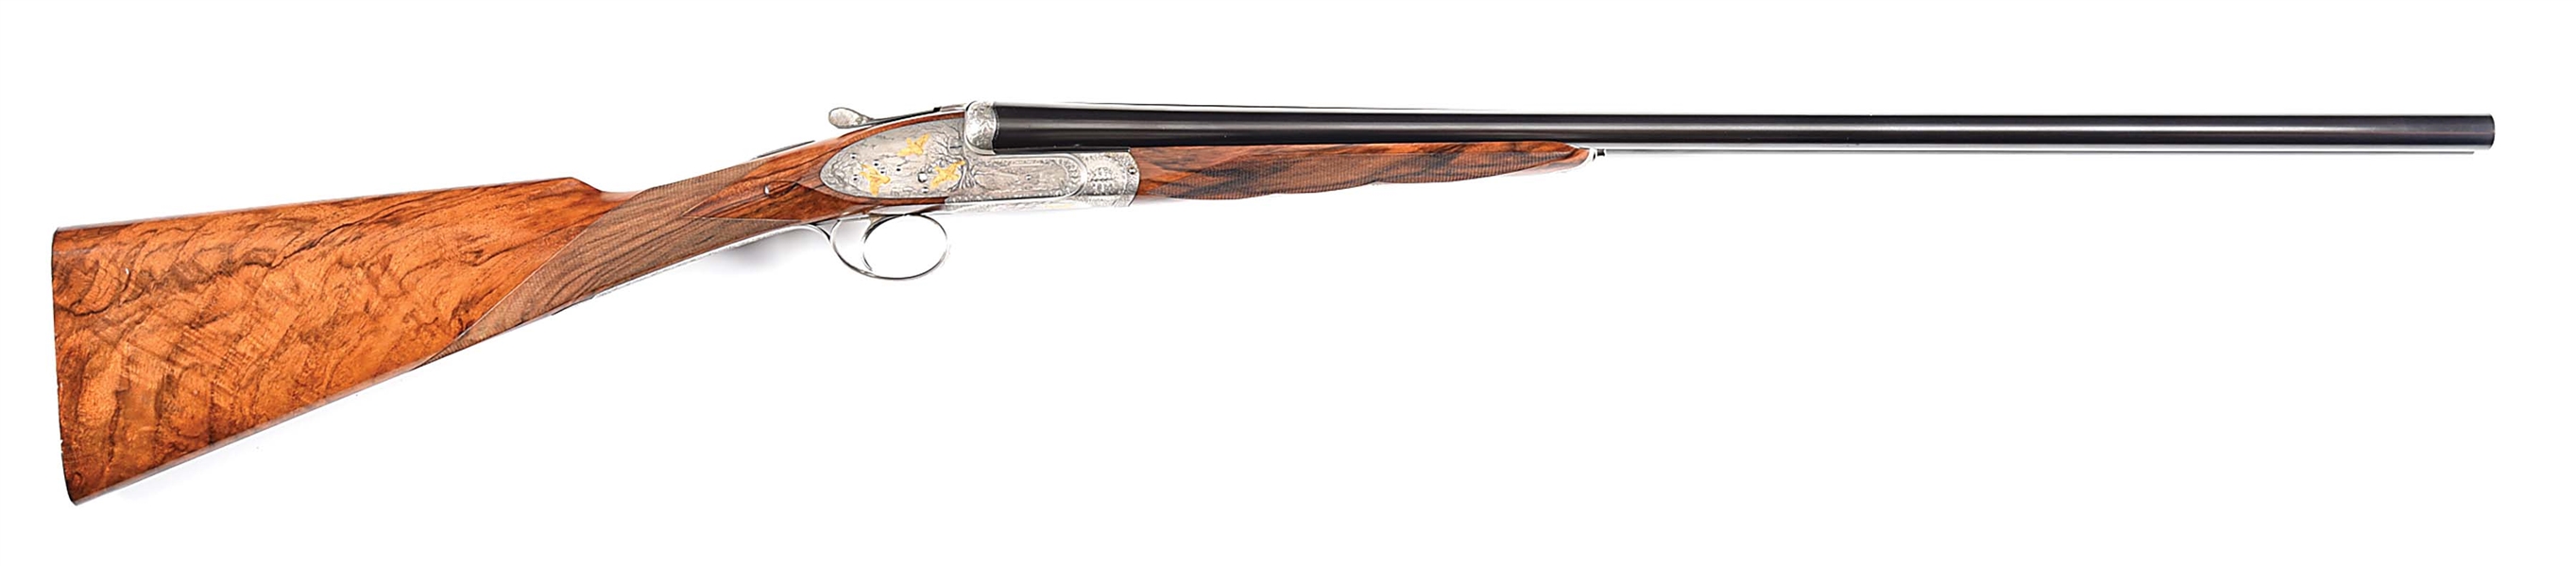 (M) AN ATTRACTIVE BERTUZZI VENERE 20 BORE SIDE BY SIDE GAME GUN, WITH MASTERFULLY EXECUTED GOLD INLAID GAME SCENES, SIGNED BY ZANELLI.